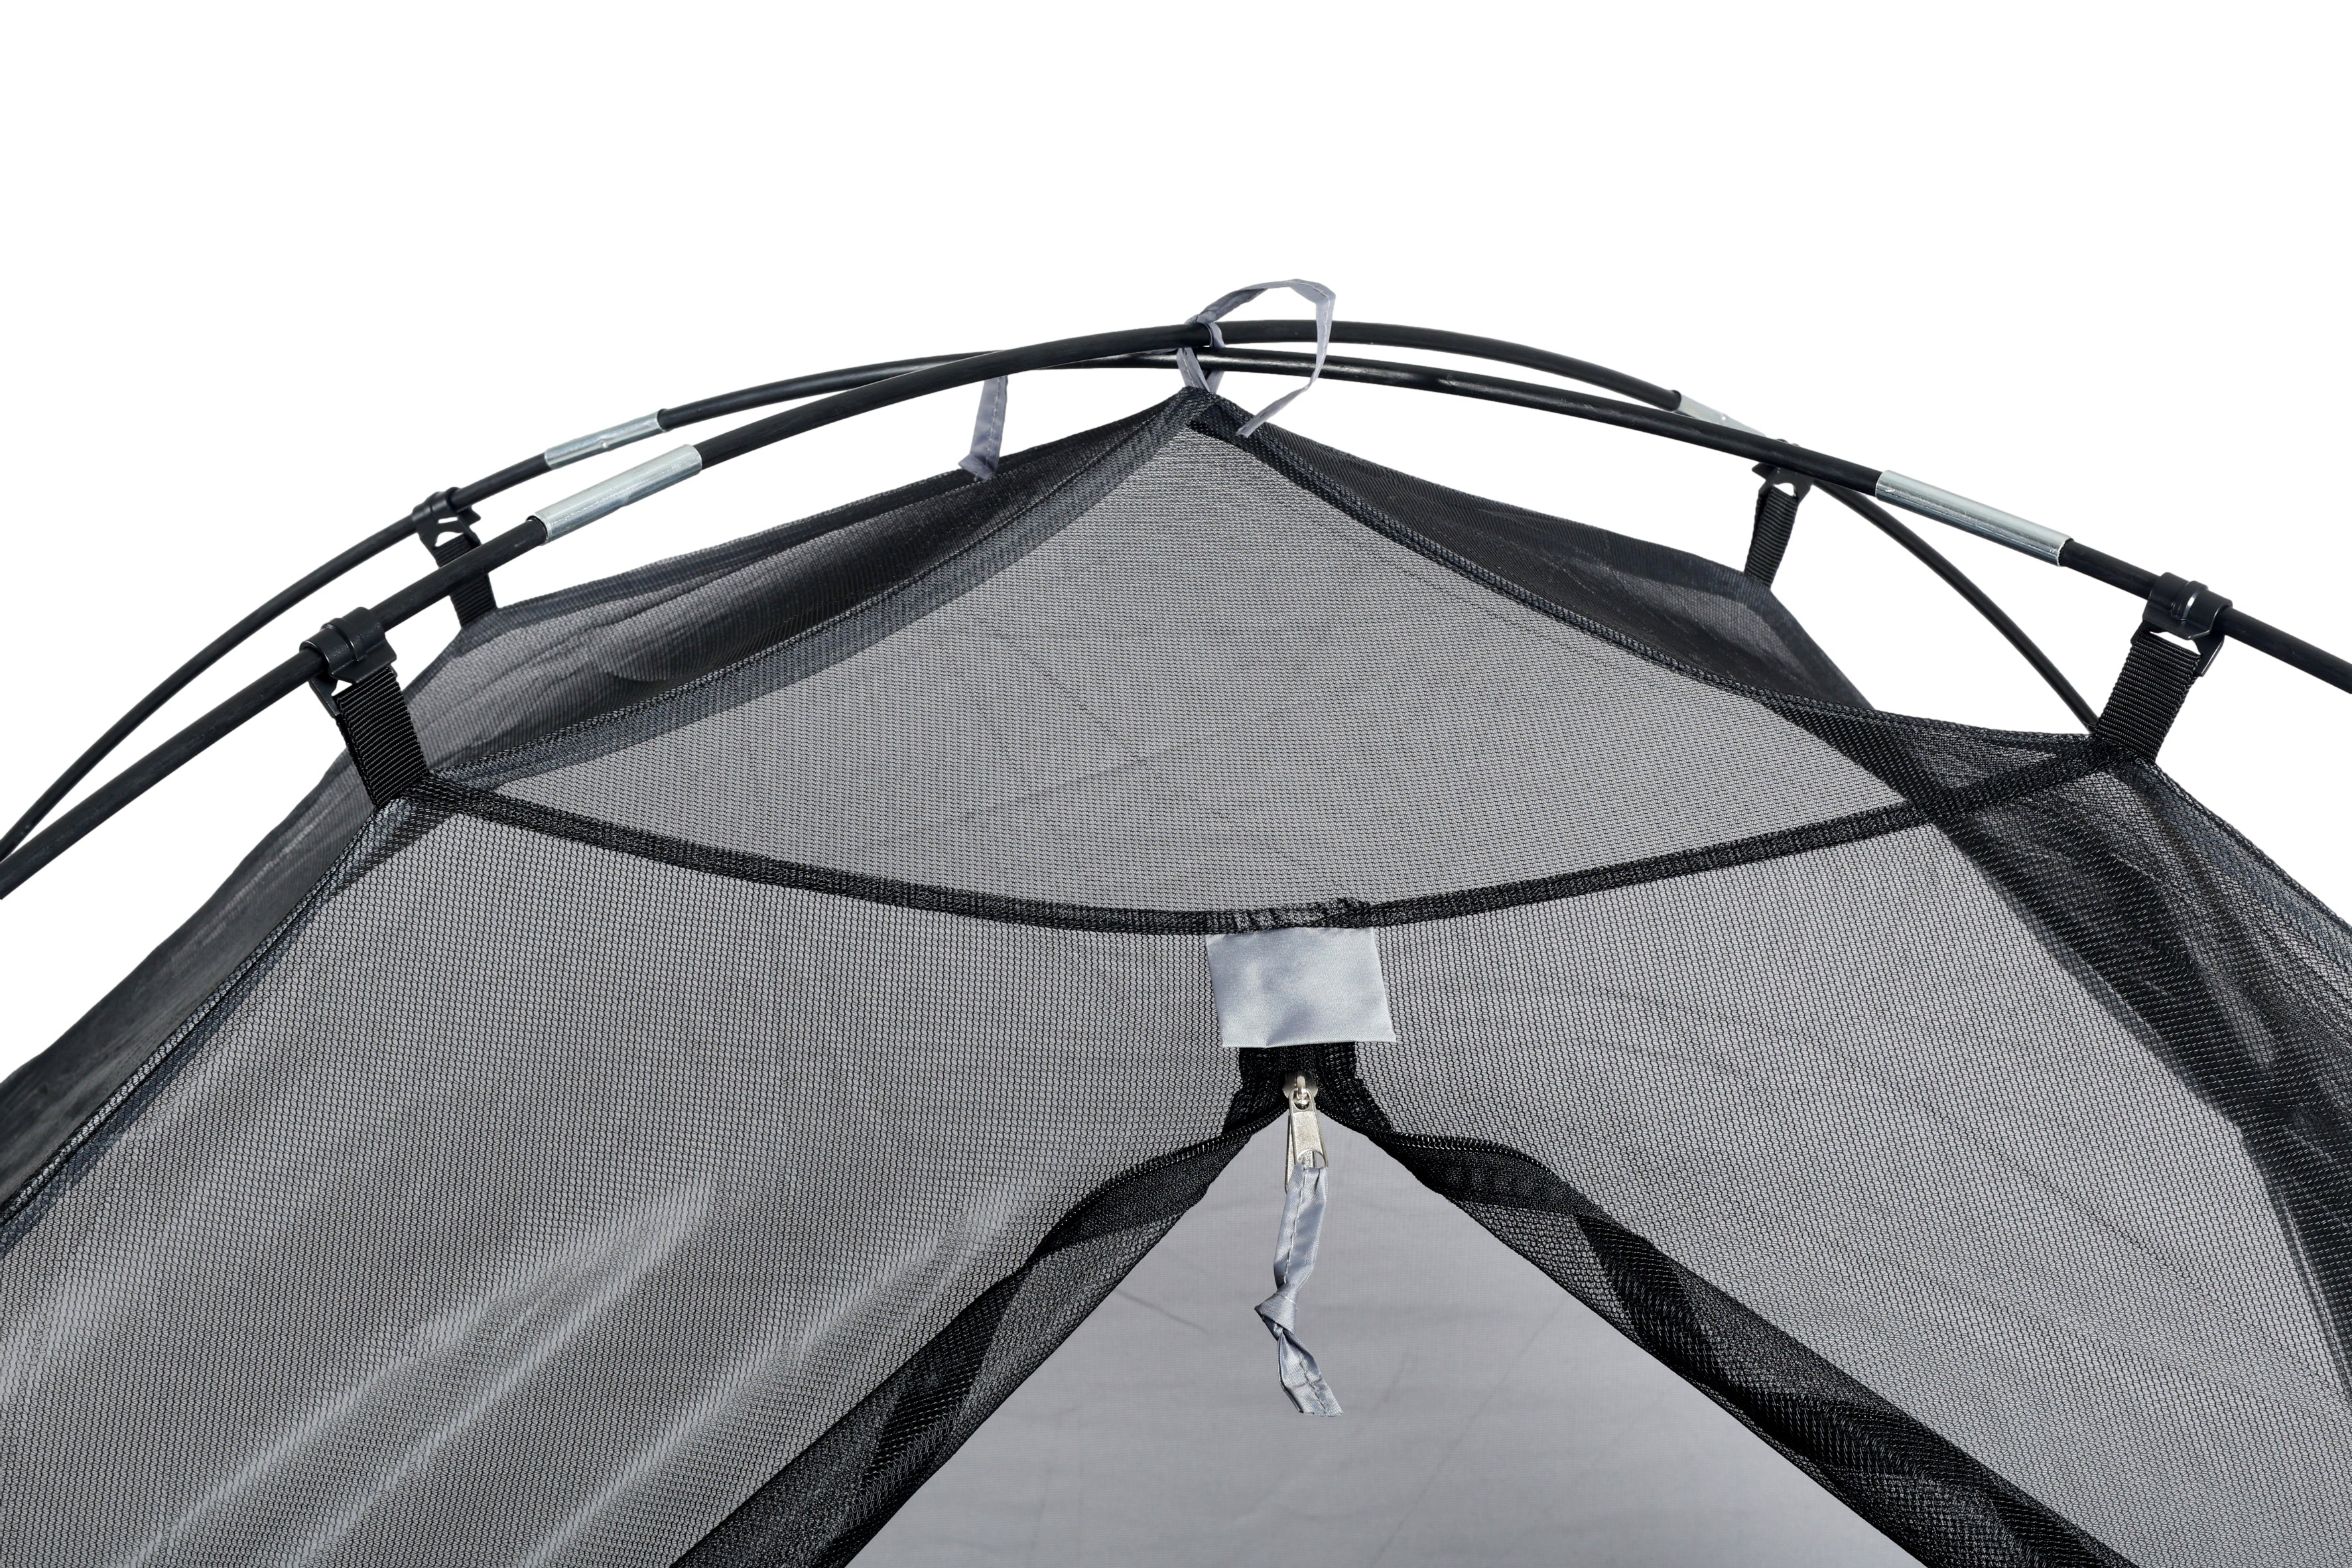 TANAMI SERIES II 3 PERSON DOME TENT